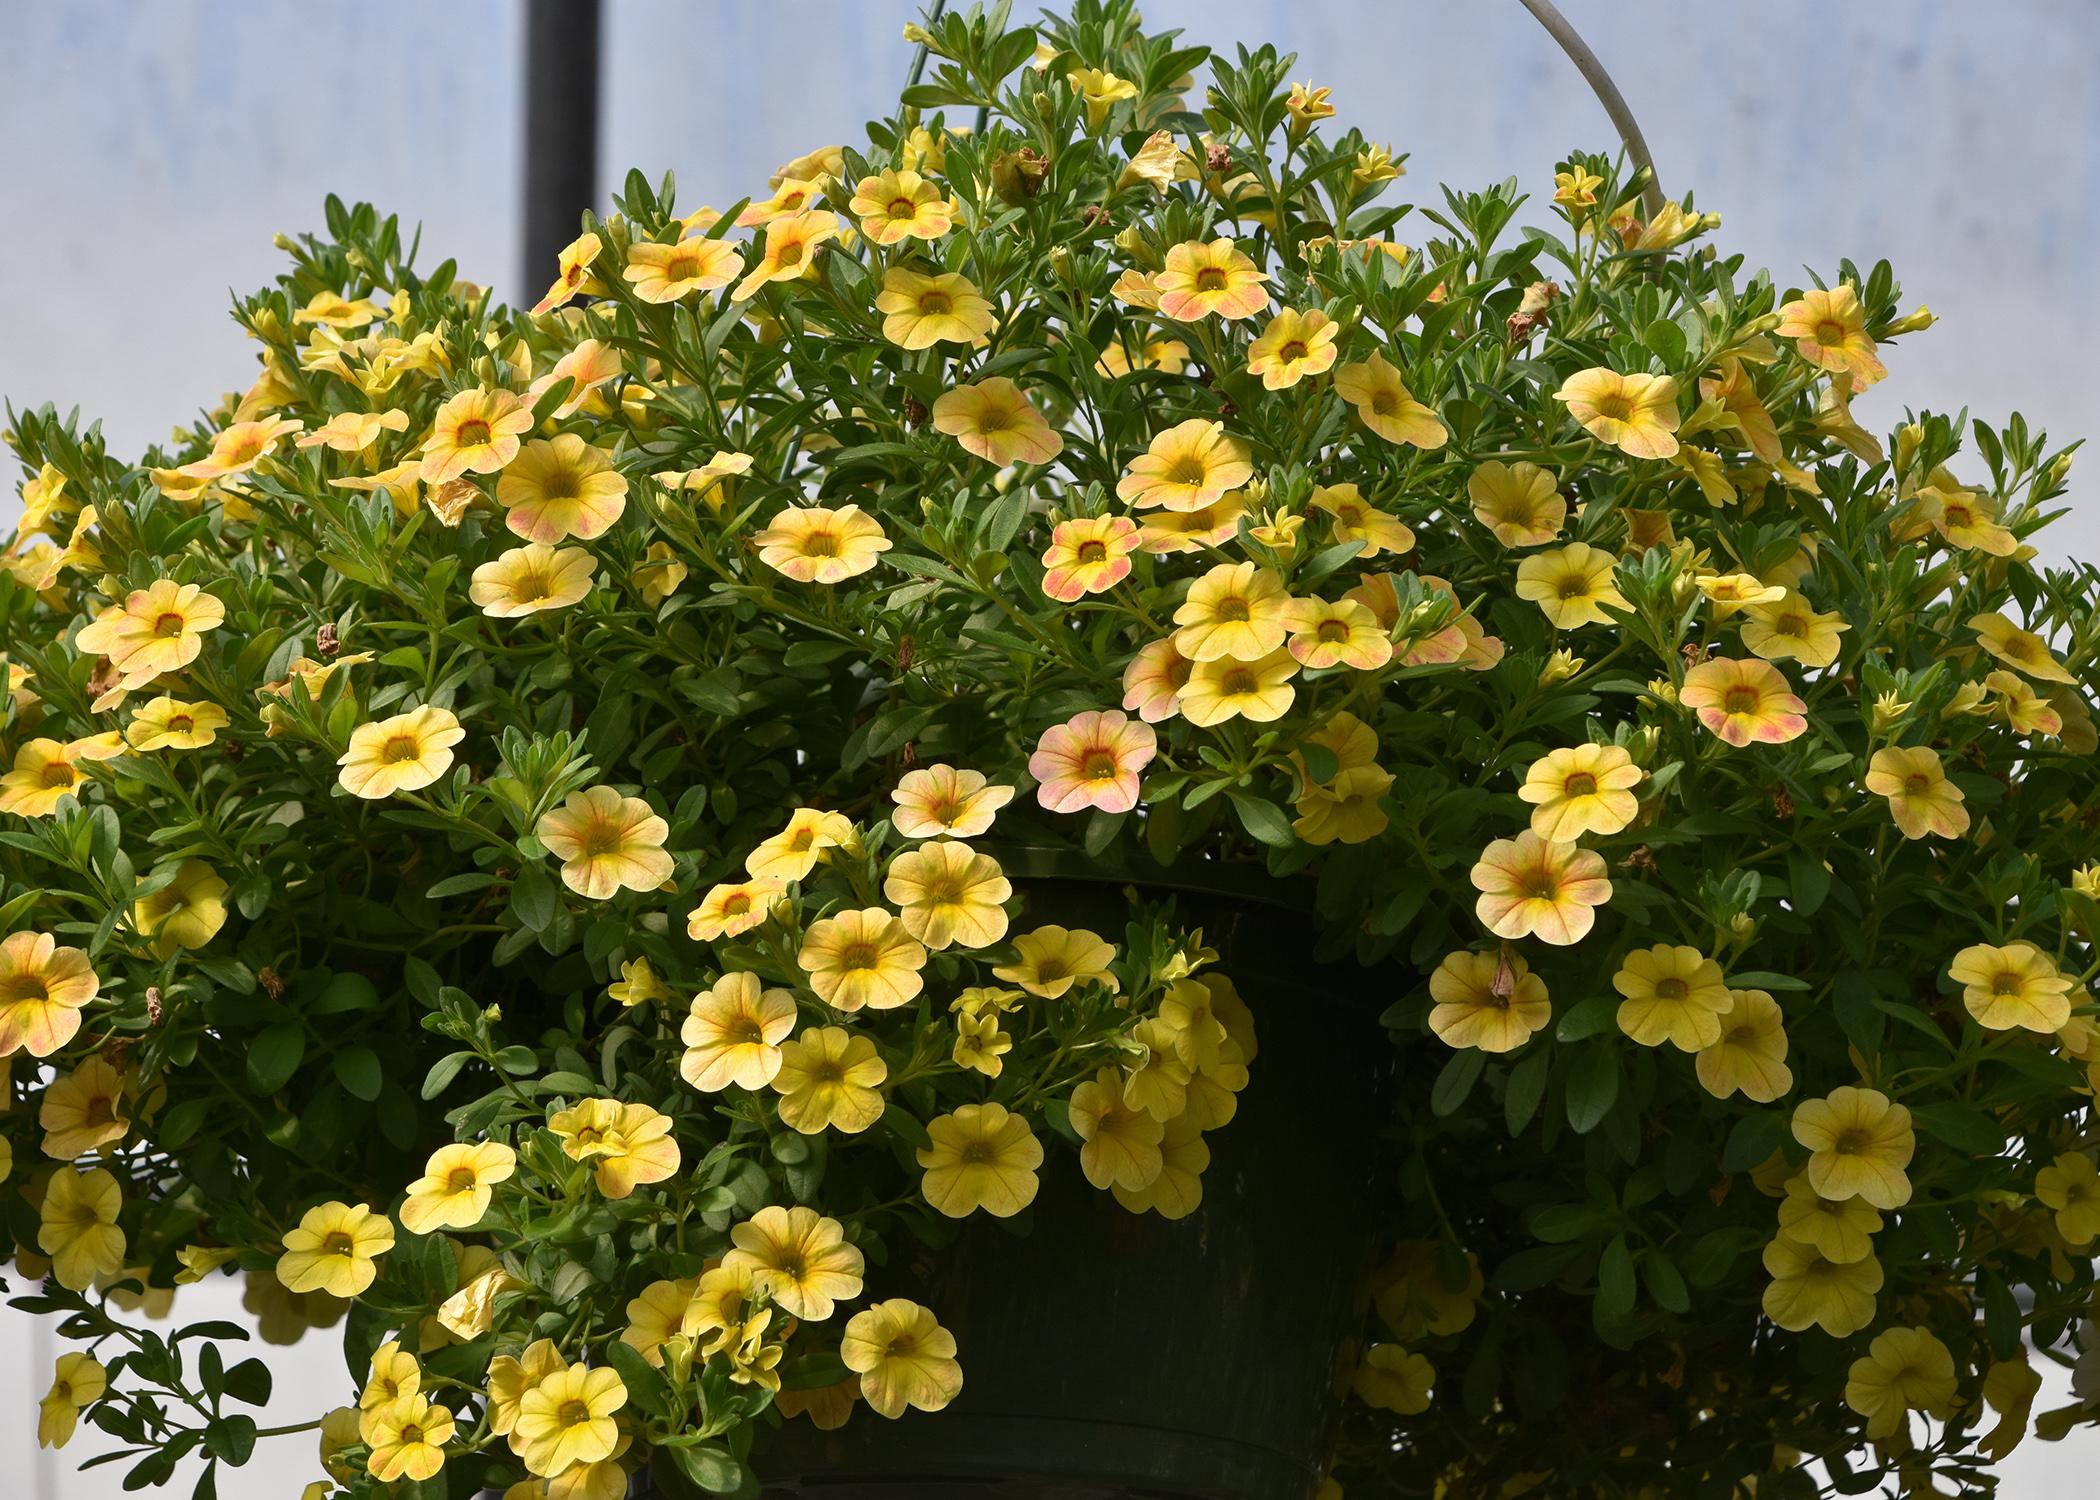 Yellow flowers cover a hanging basket.